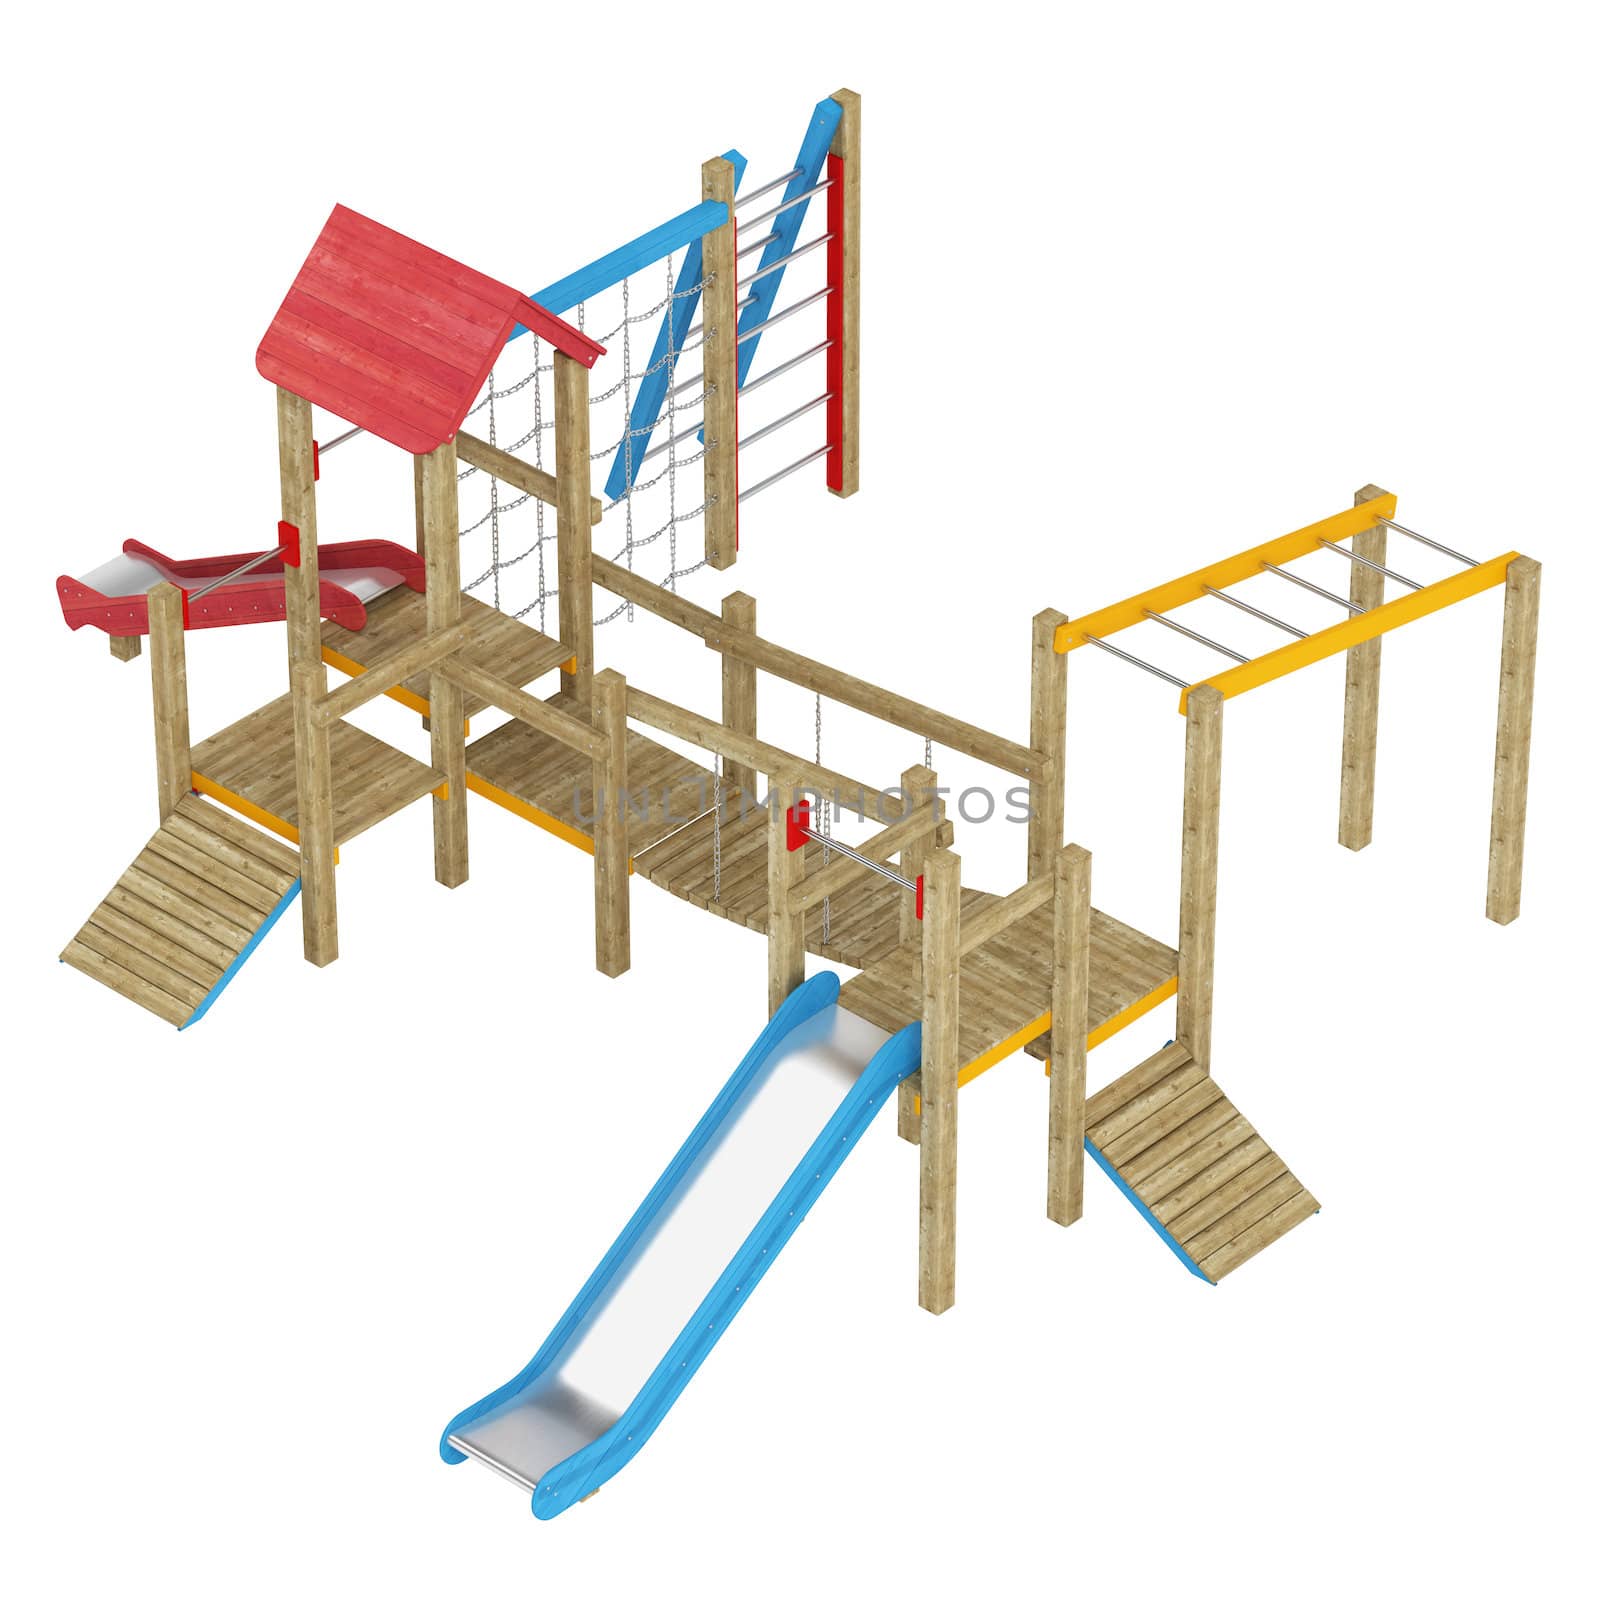 Wooden childrens playground apparatus with slides, climbing frames and walkway isolated on white